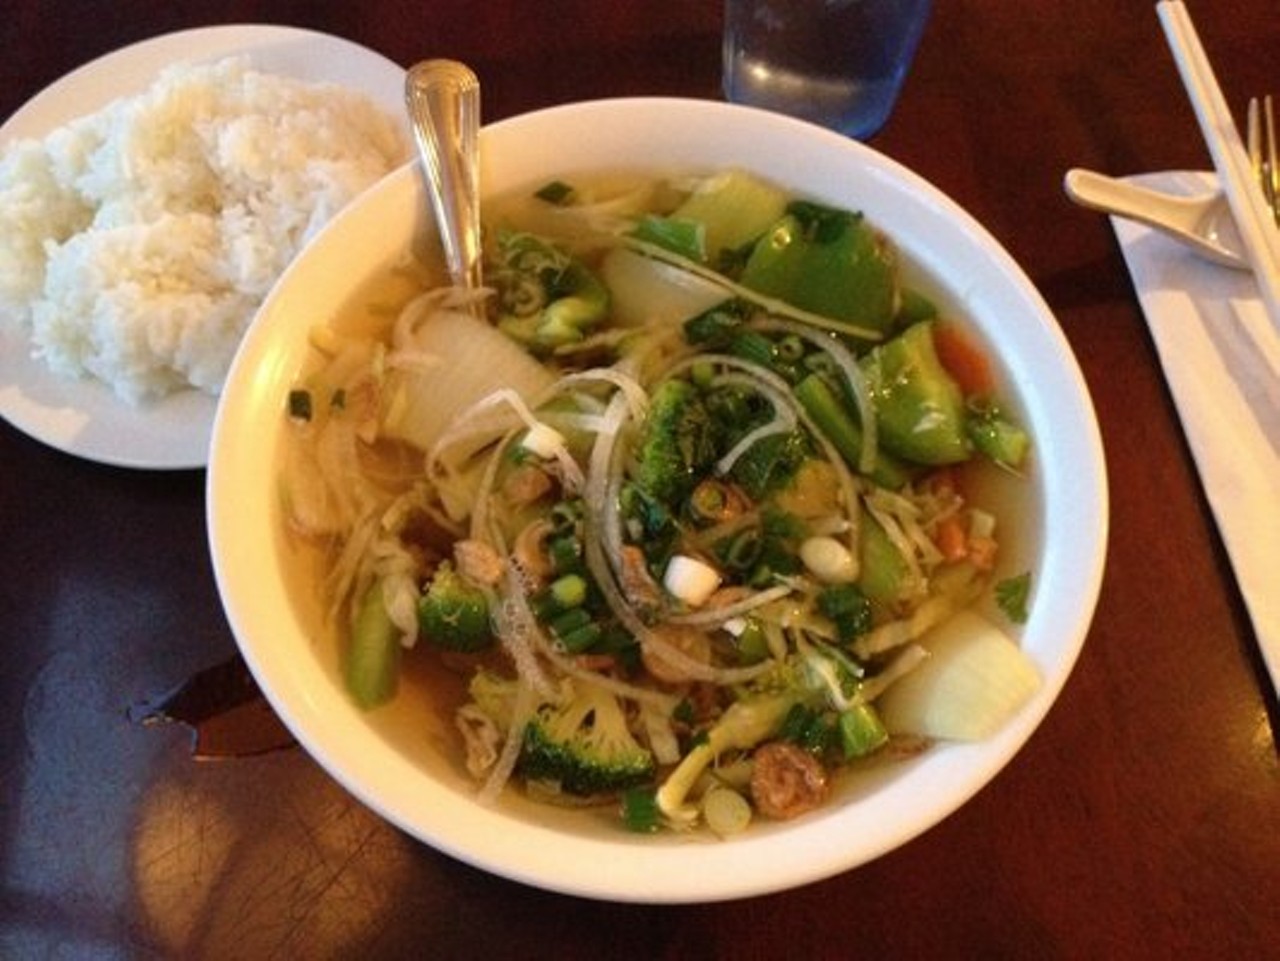 #1 Pho is located at 3120 Superior Ave E, Cleveland. Call (216)781-1176 for more information.